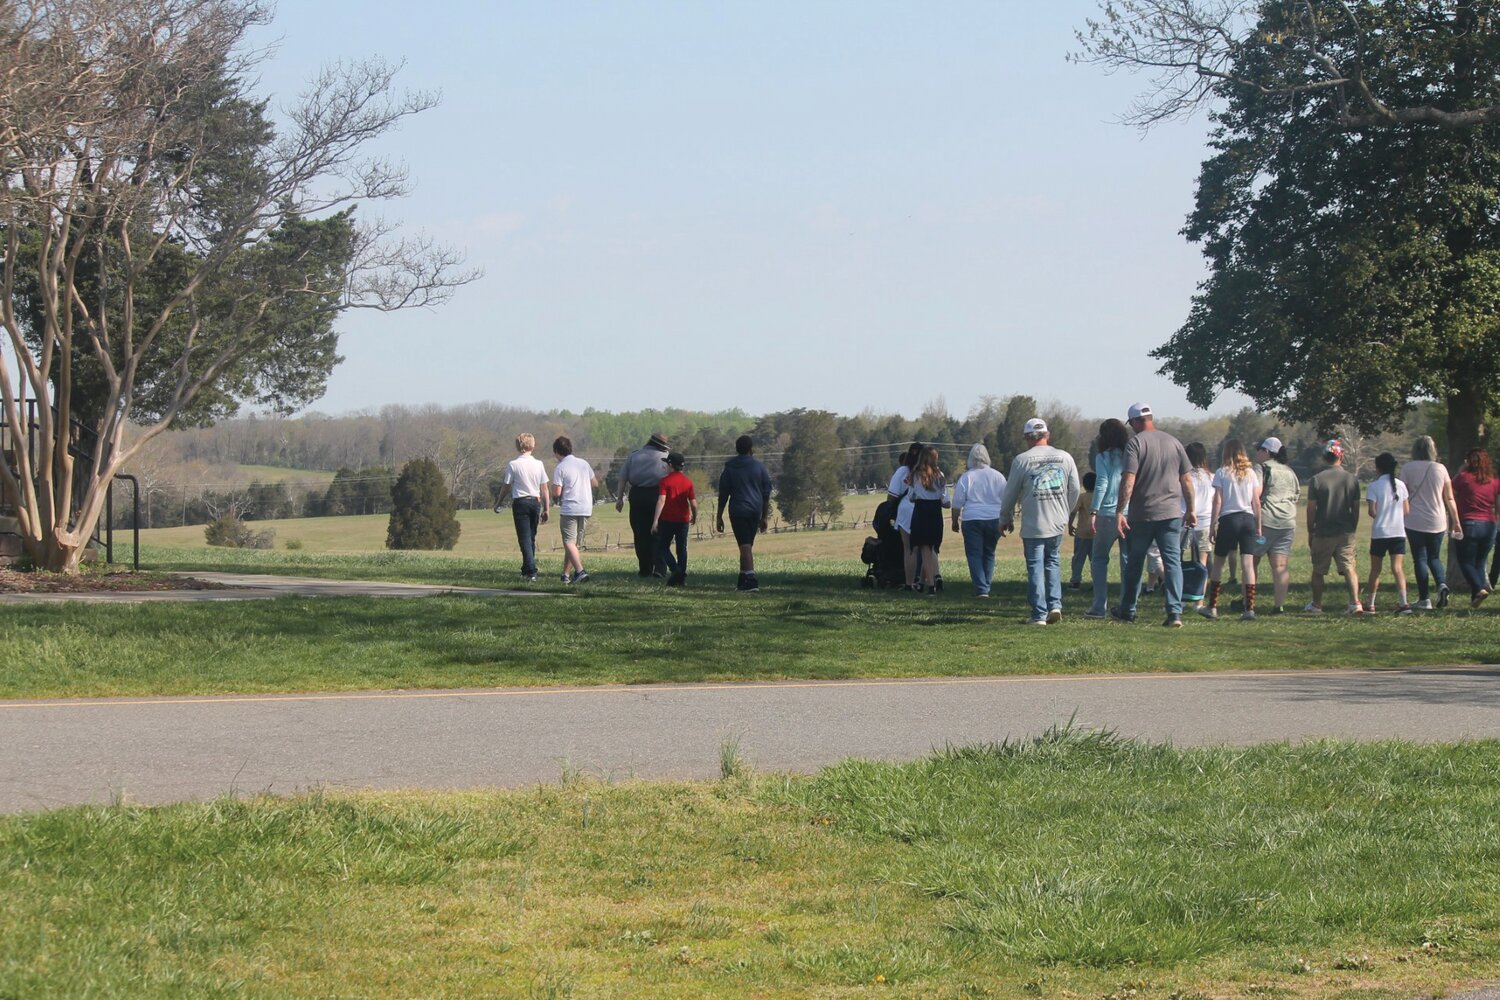 Wicomico Day School fifth graders and parents enjoyed a visit to Manassas Battlefield thanks to a field trip grant from the American Battlefield Trust. (Courtesy photo)